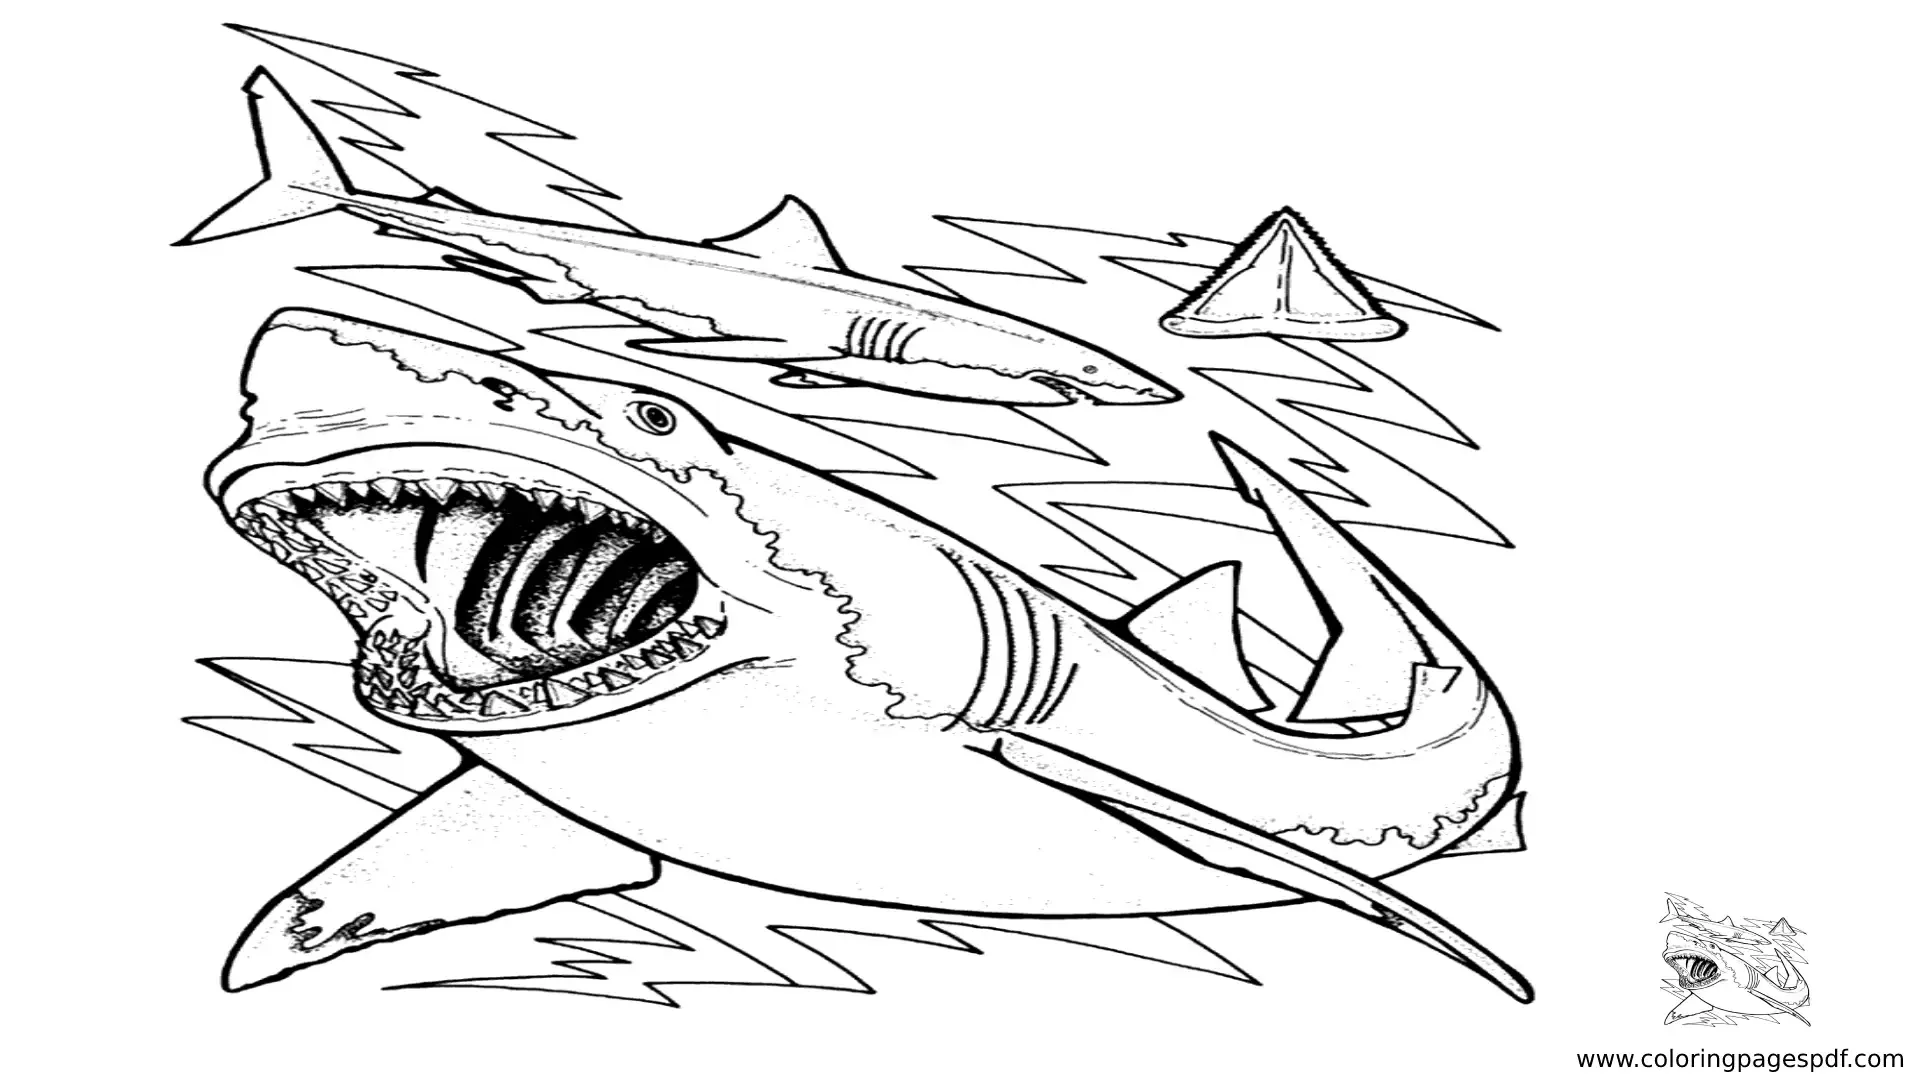 Coloring Pages Of A Shark With Sharp Teeth